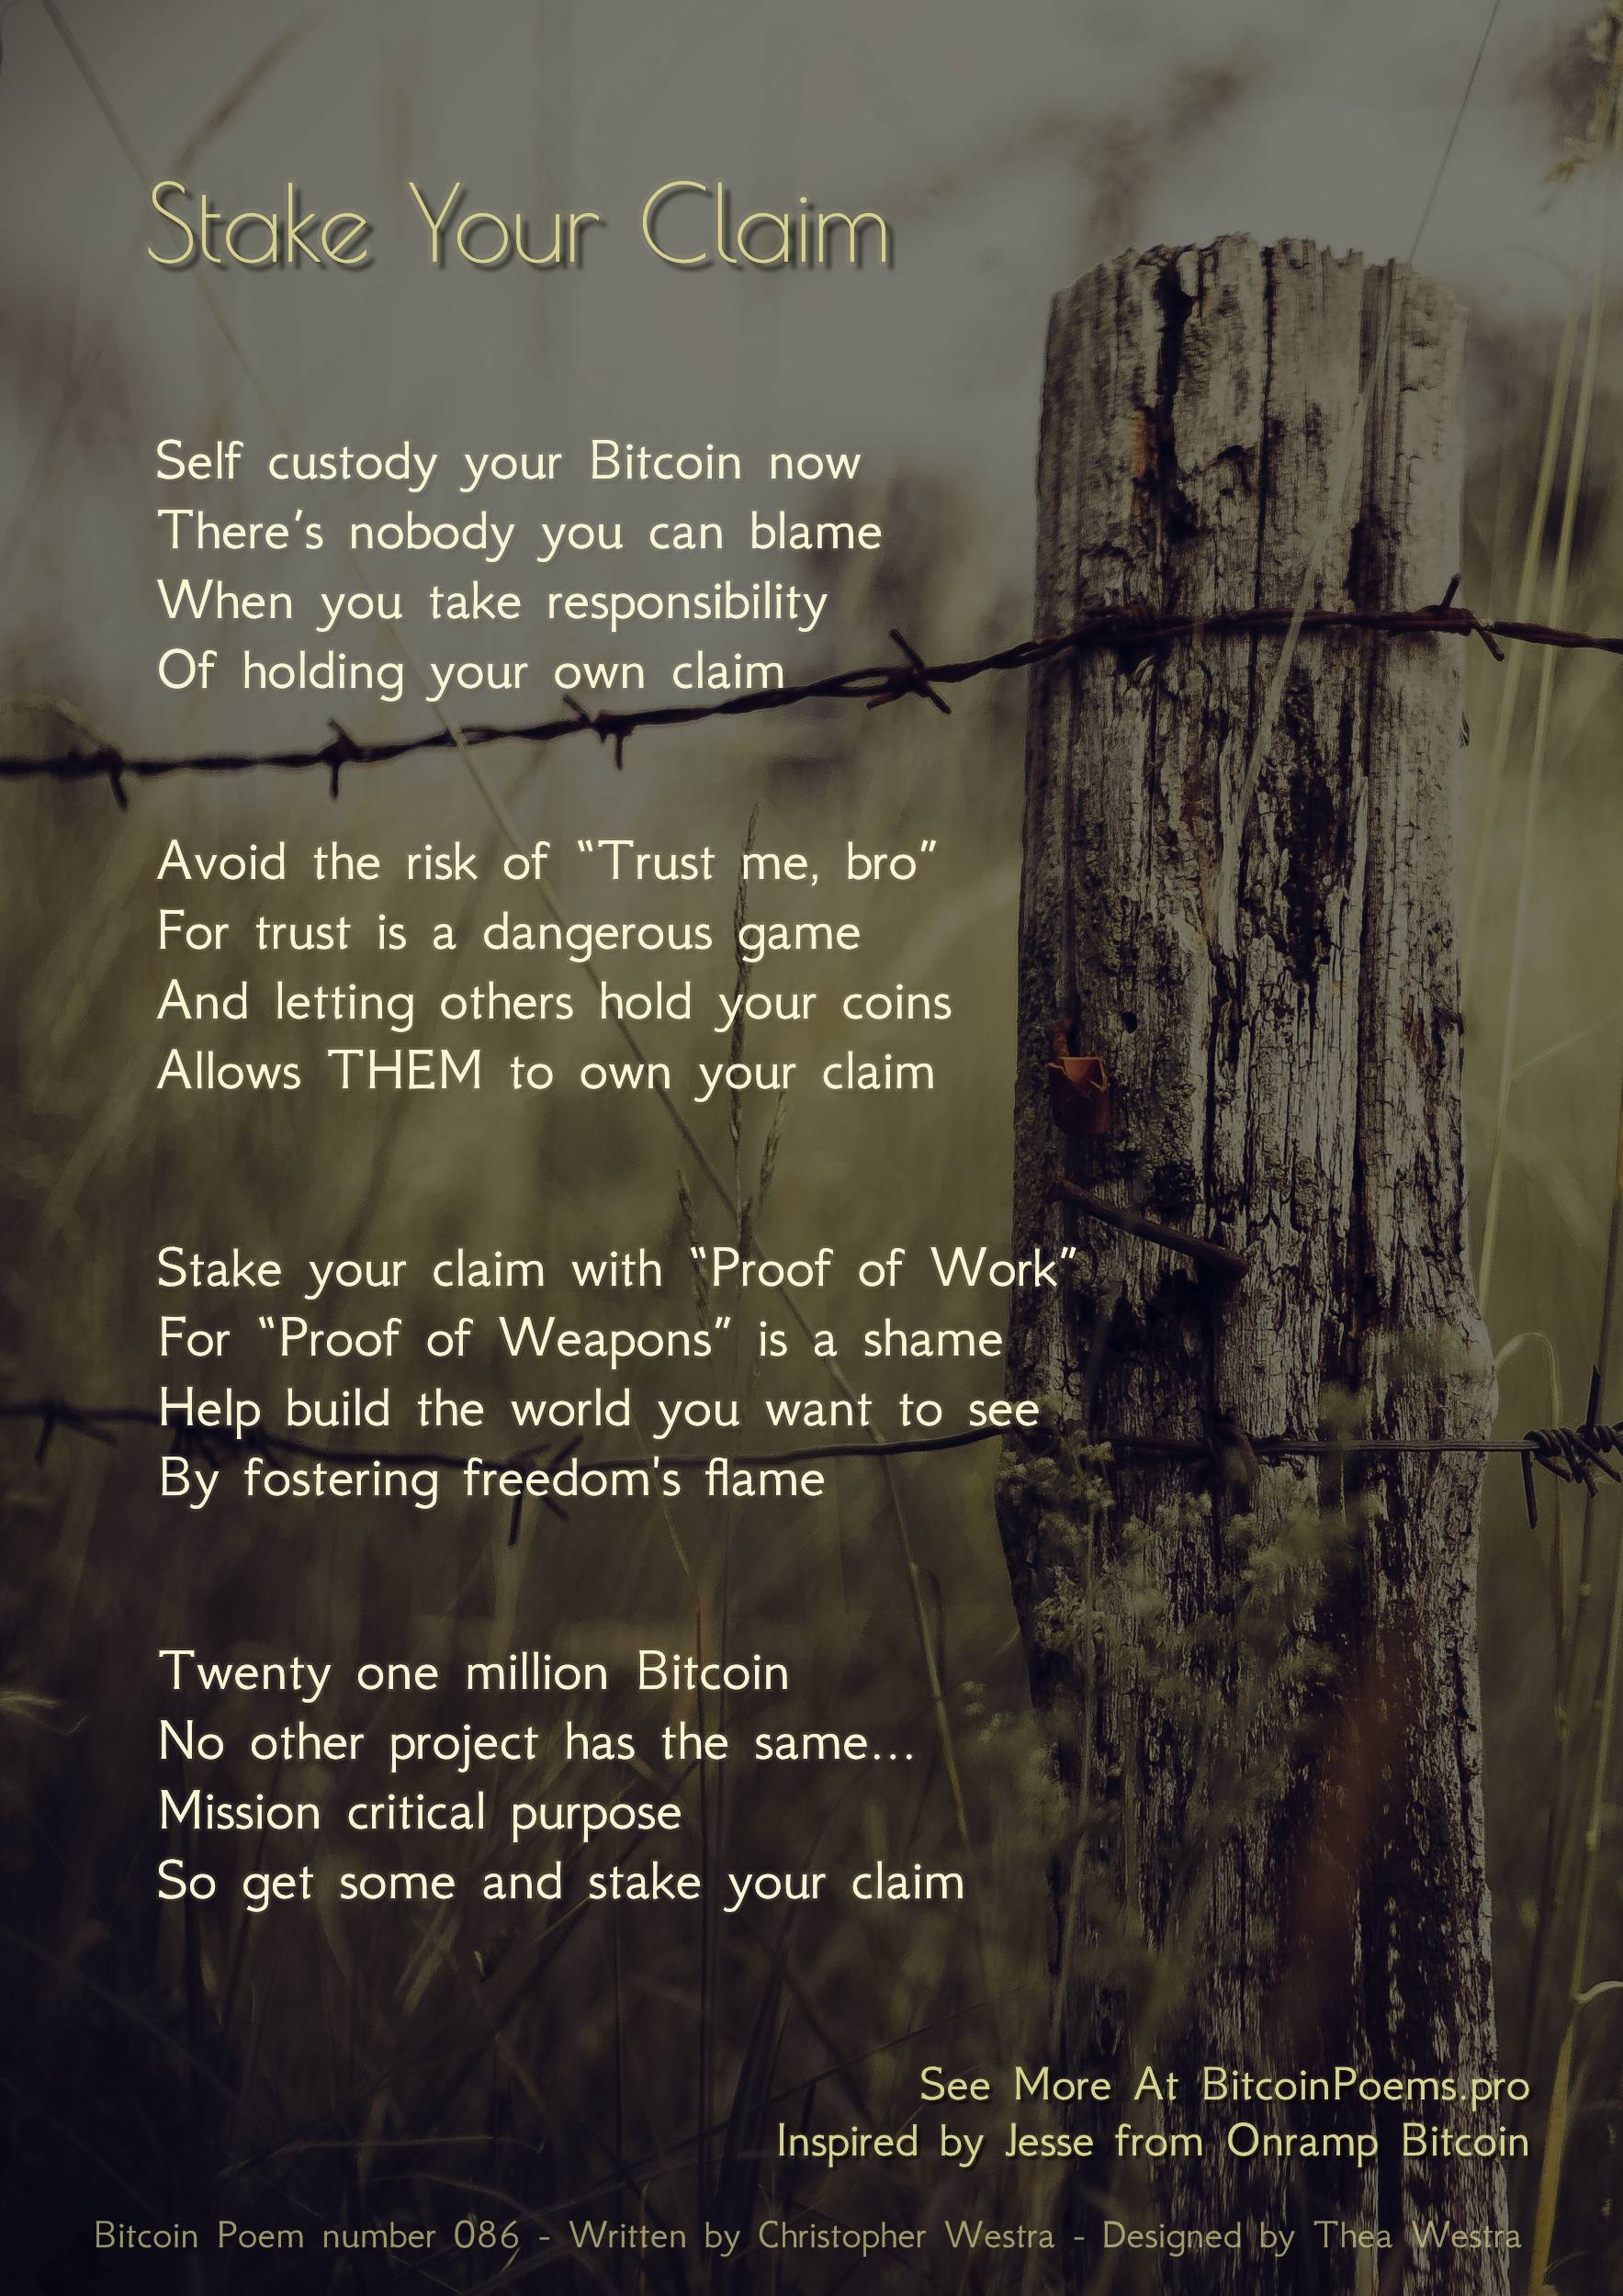 Stake Your Claim - Bitcoin Poem 086 by Christopher Westra